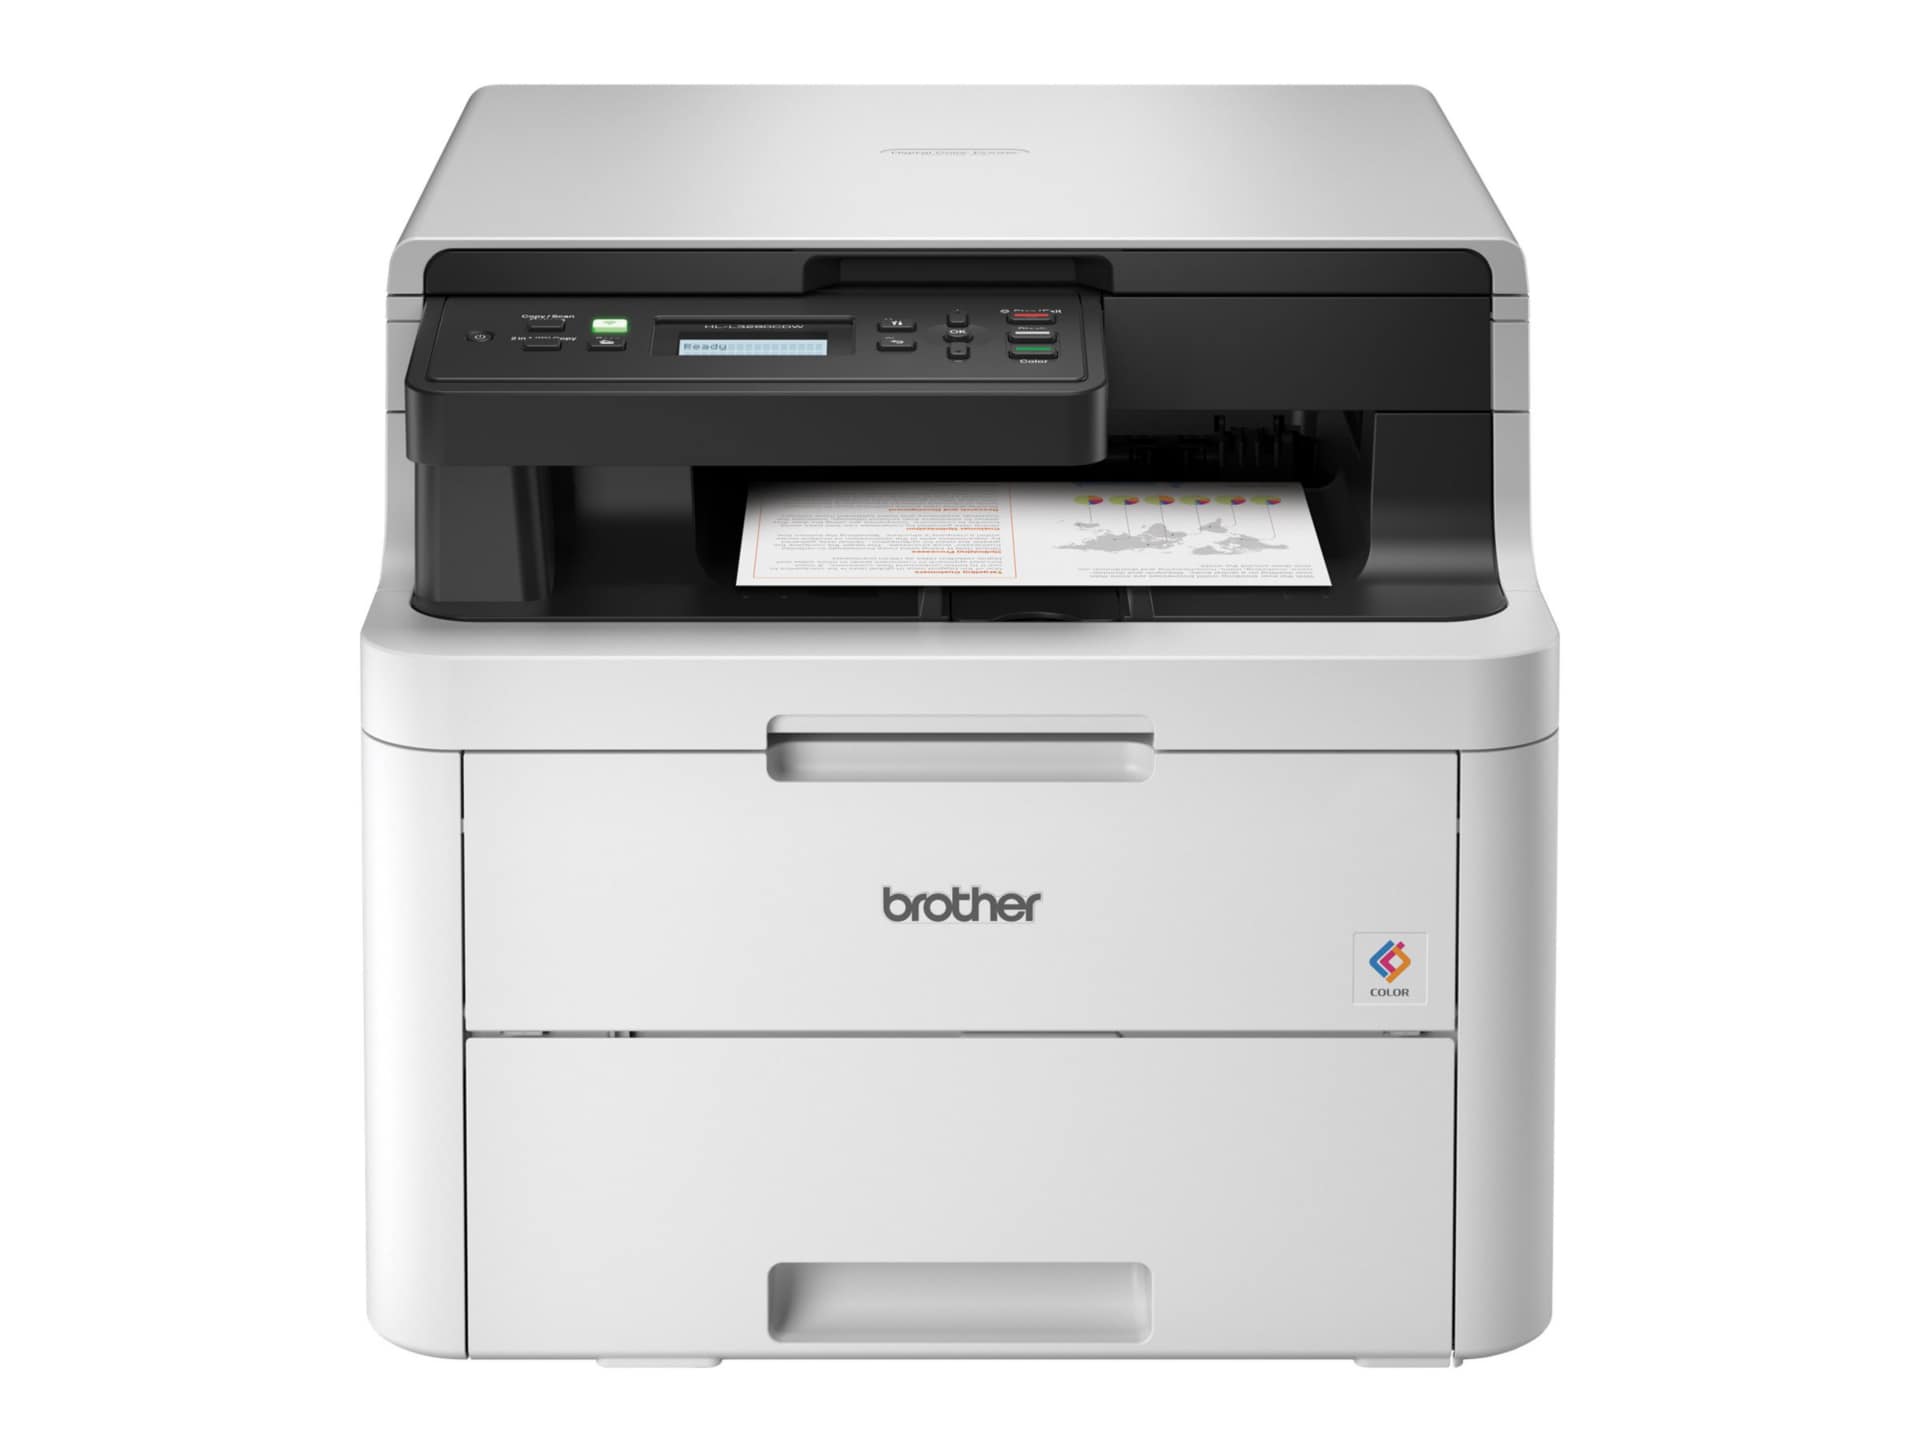 Brother HL-L3290CDW - multifunction printer - color - HL-L3290CDW All-in- Printers - CDW.com